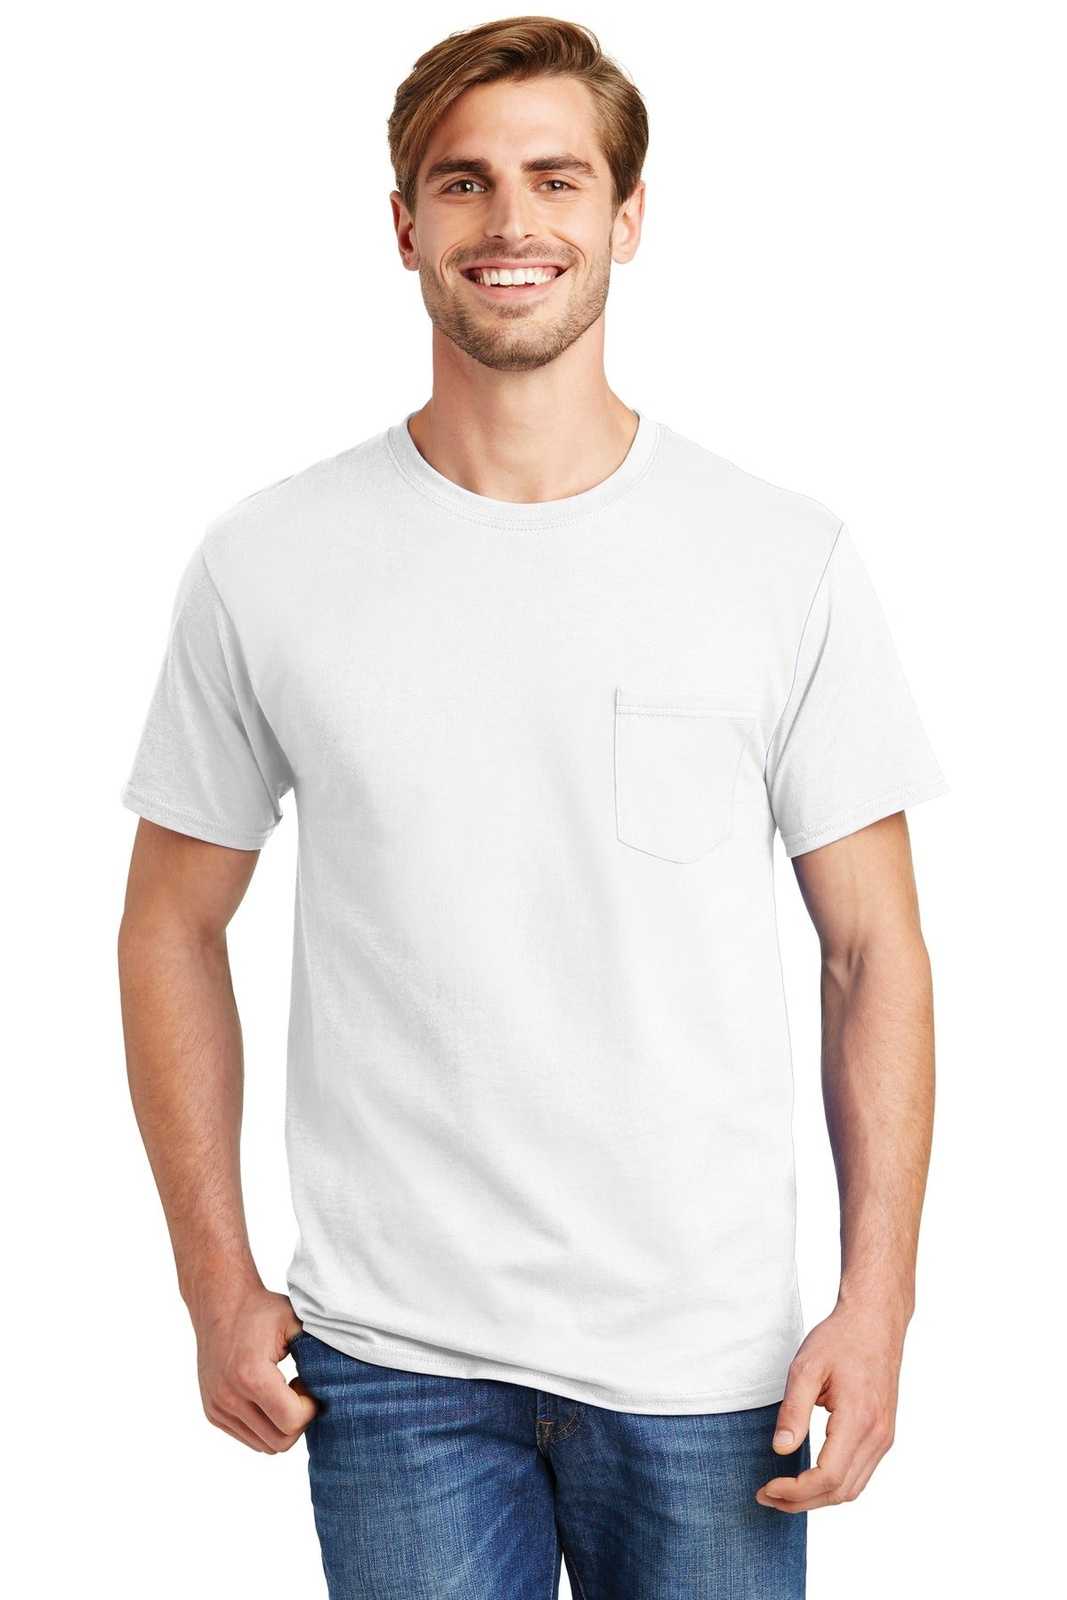 Hanes 5590 Tagless 100% Cotton T-Shirt with Pocket - White - HIT a Double